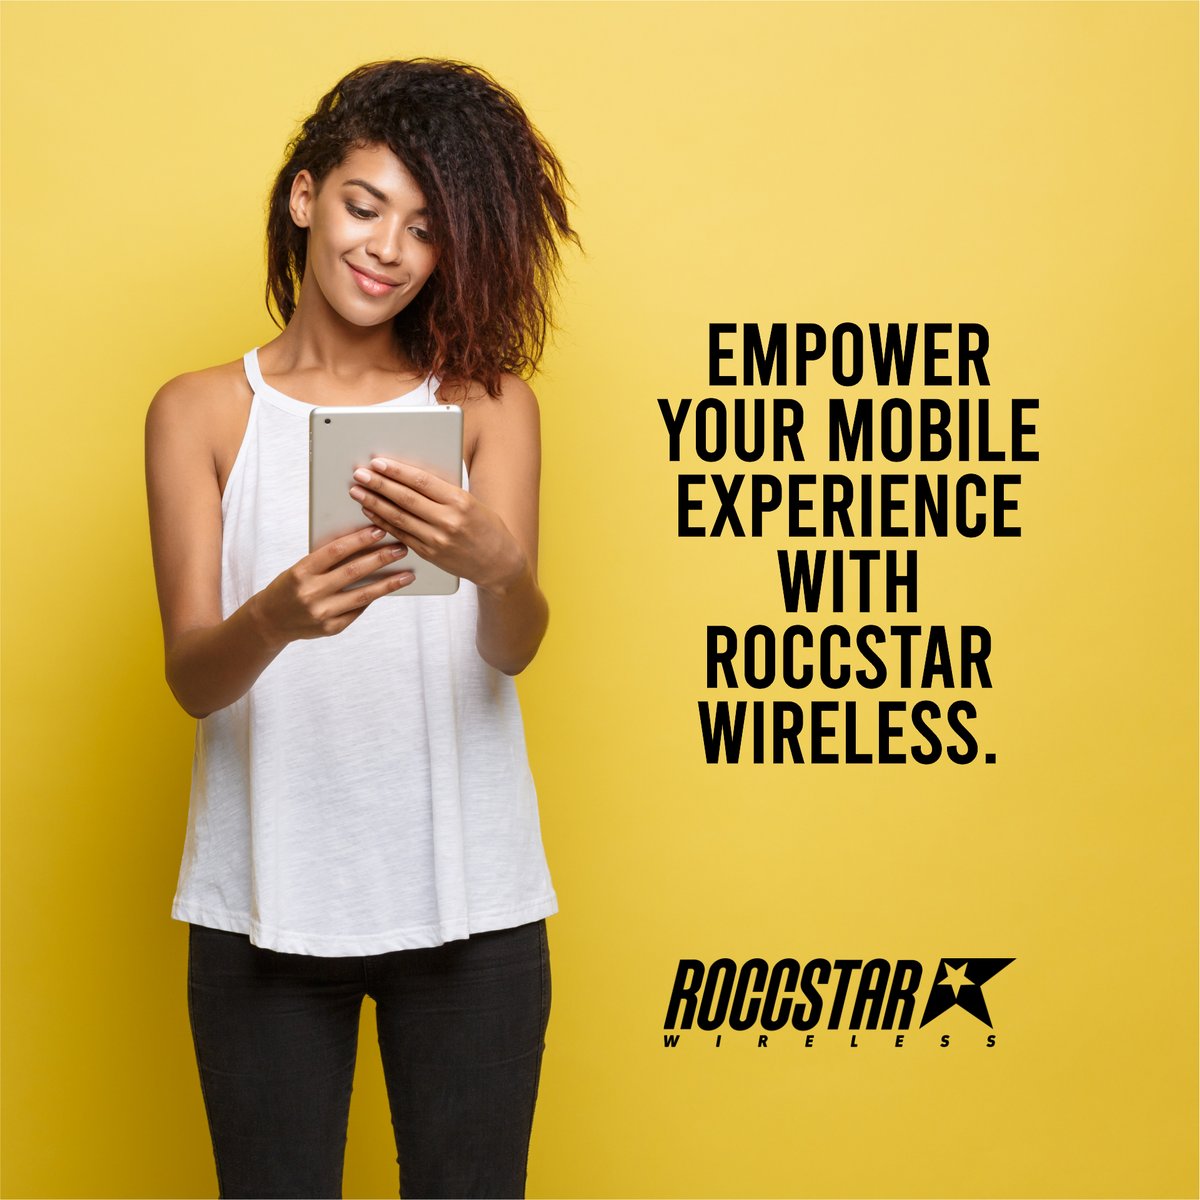 Take control of your mobile experience with Roccstar Wireless. With lightning-fast speeds and reliable coverage, our network empowers you to do more, stream more, and stay connected like never before.
-
Contact us now: roccstarwireless.com

#roccstarwireless
#mobileempowerment